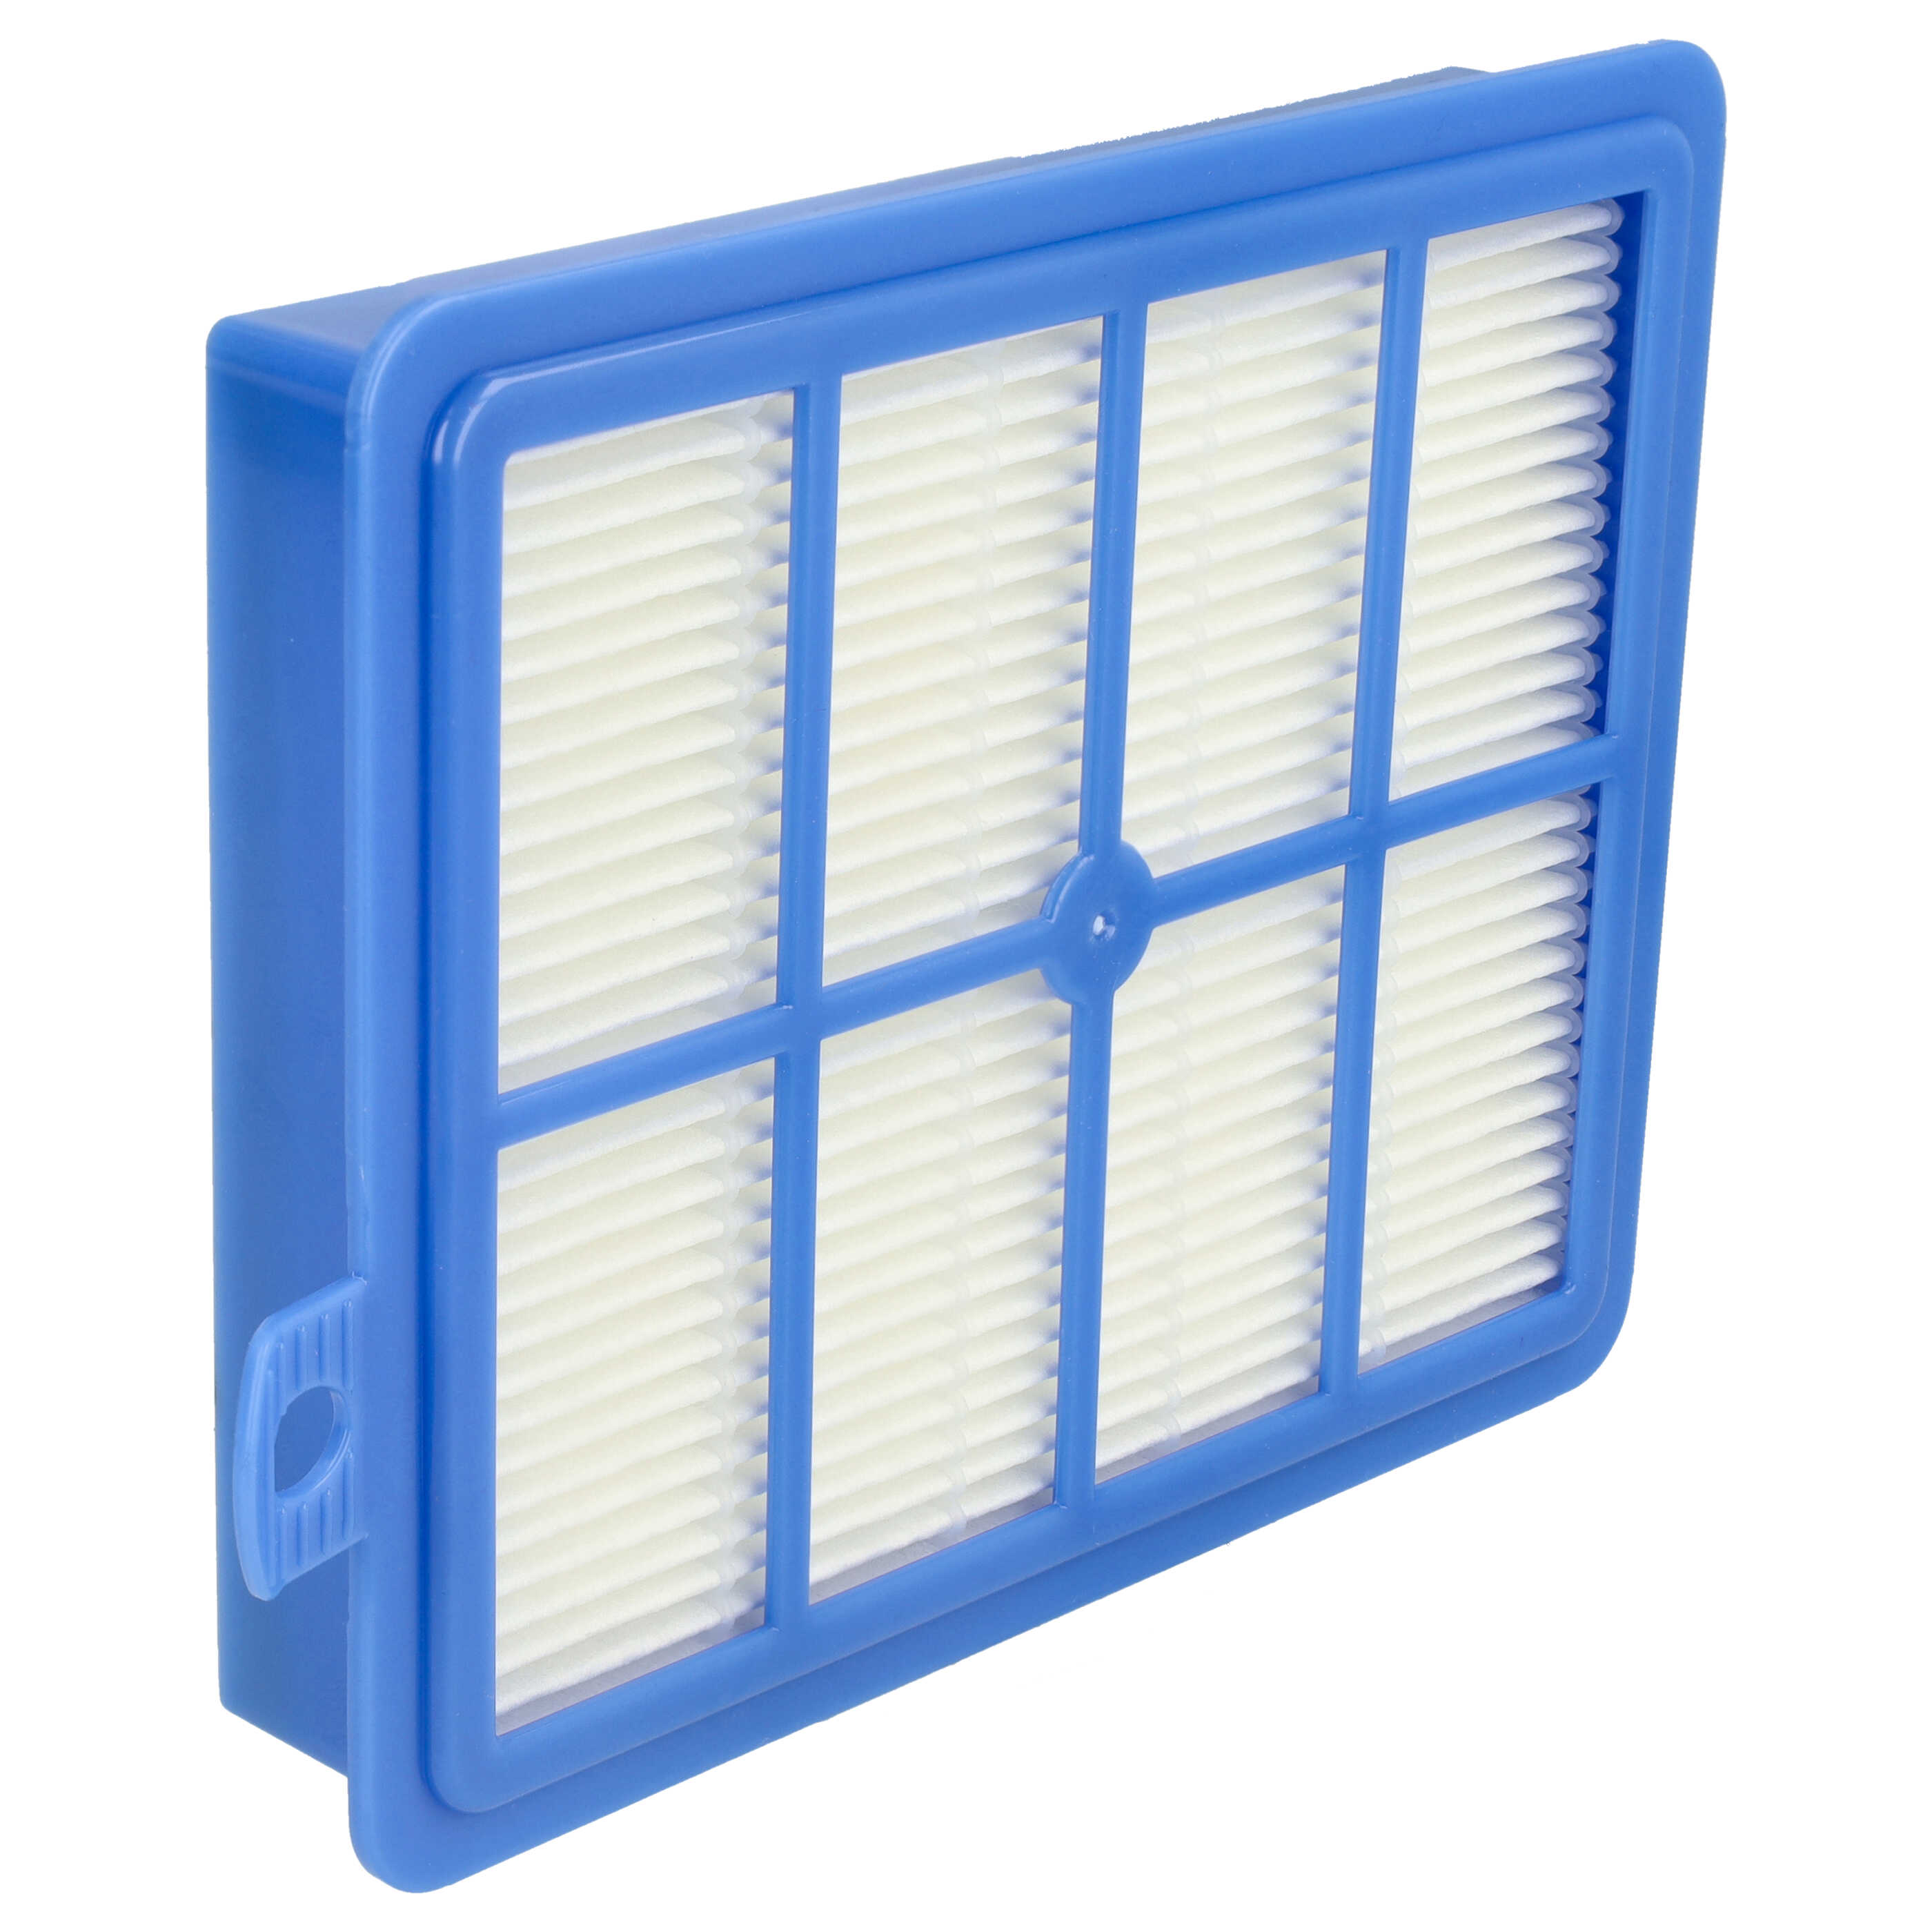 1x HEPA filter replaces AEF13W, H13, AEF 13 W for PhilipsVacuum Cleaner